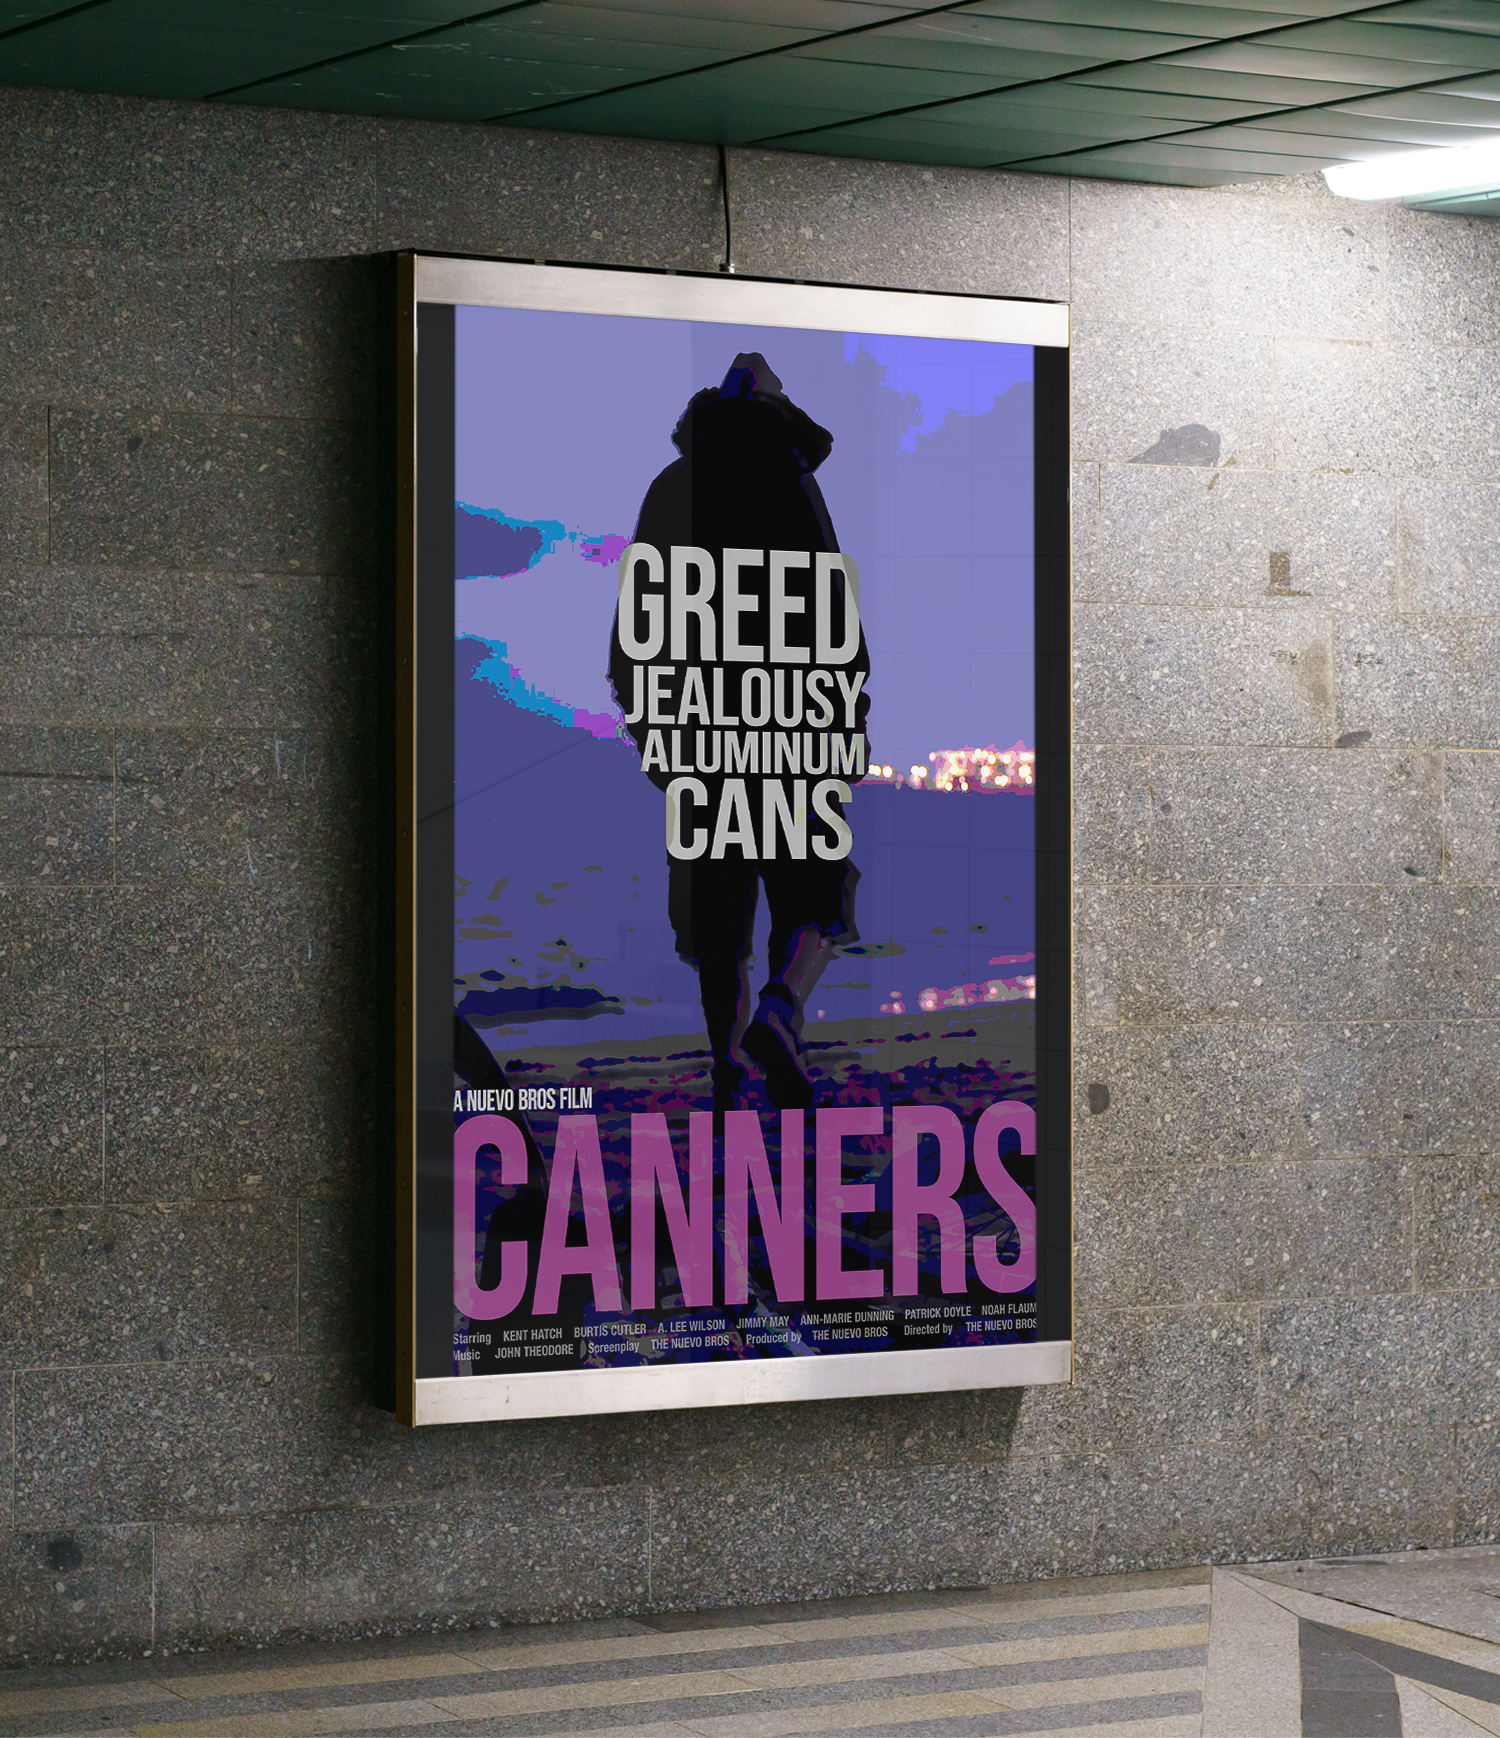 Canners movie poster on a subway kiosk